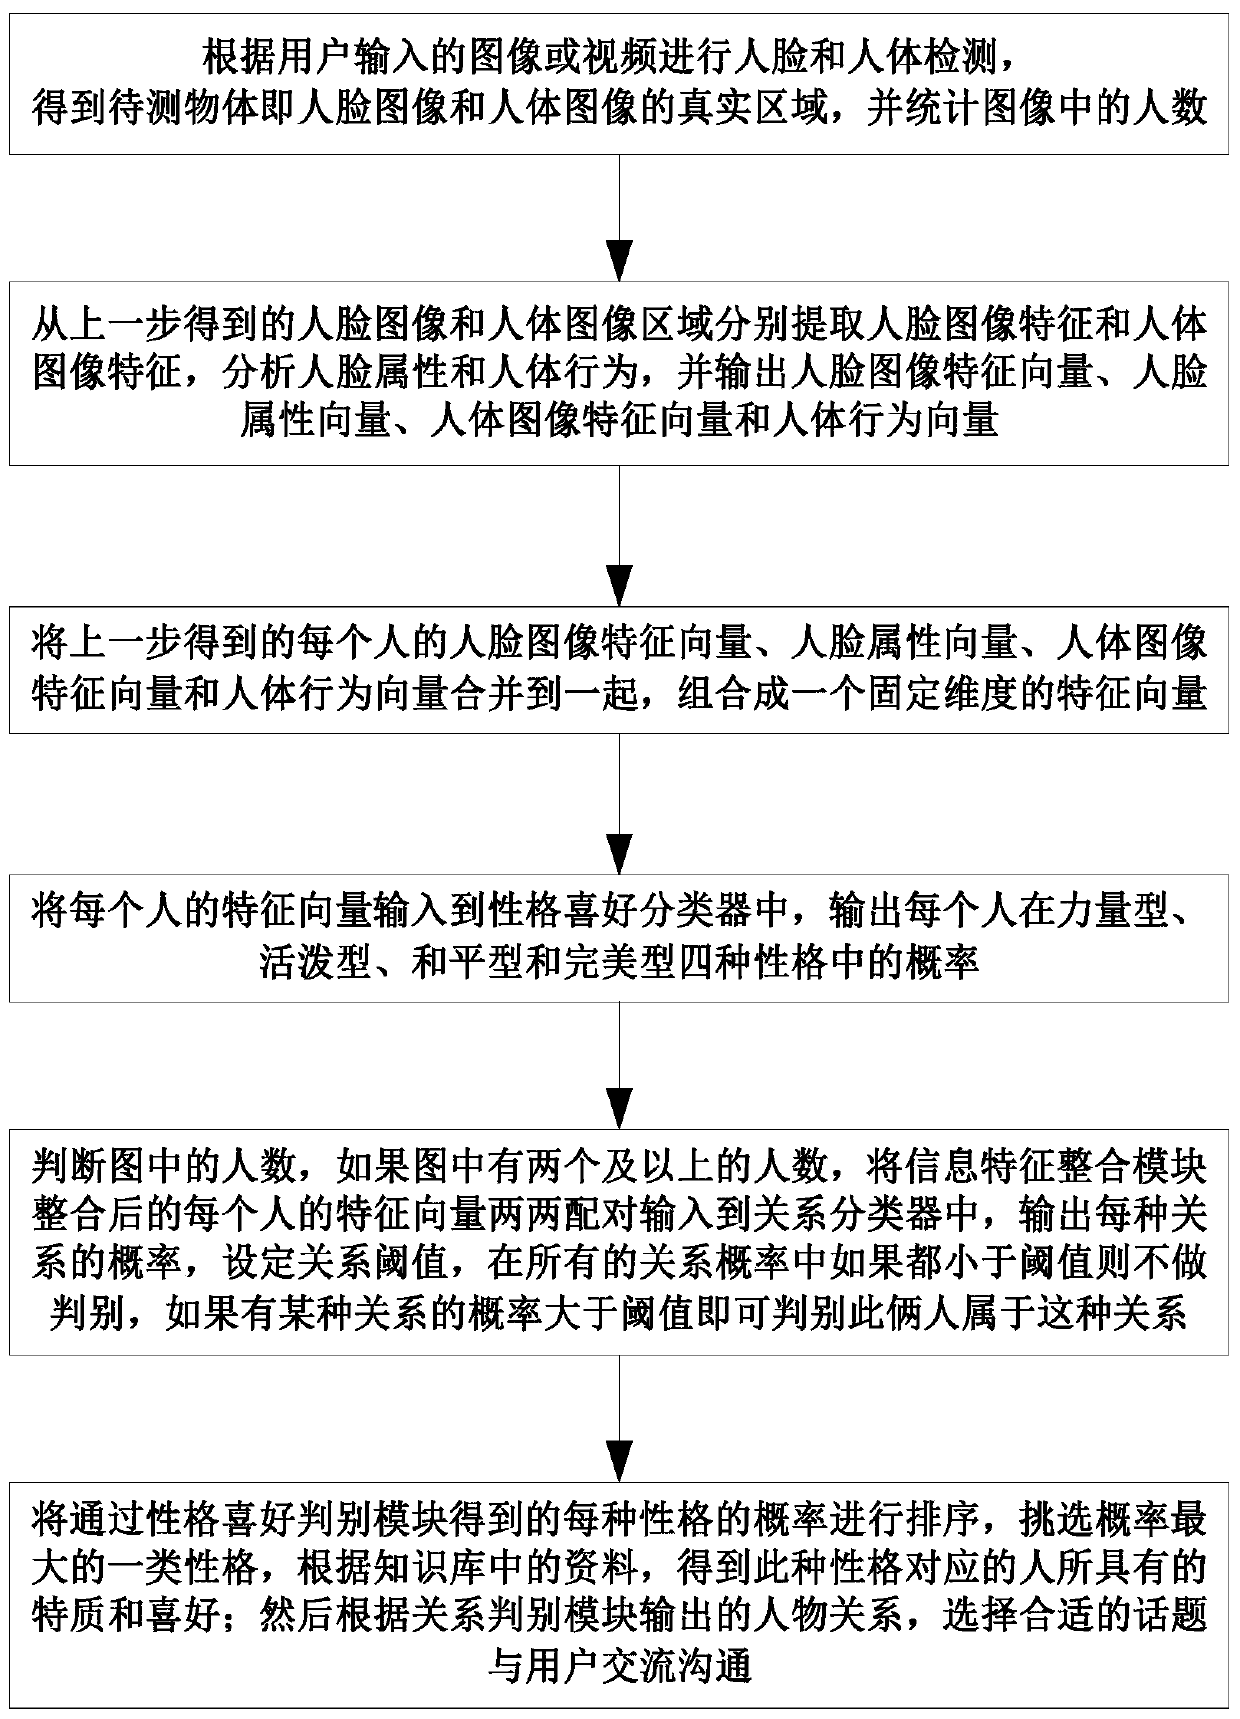 Human-Computer Interaction System and Working Method Based on Personality and Interpersonal Recognition